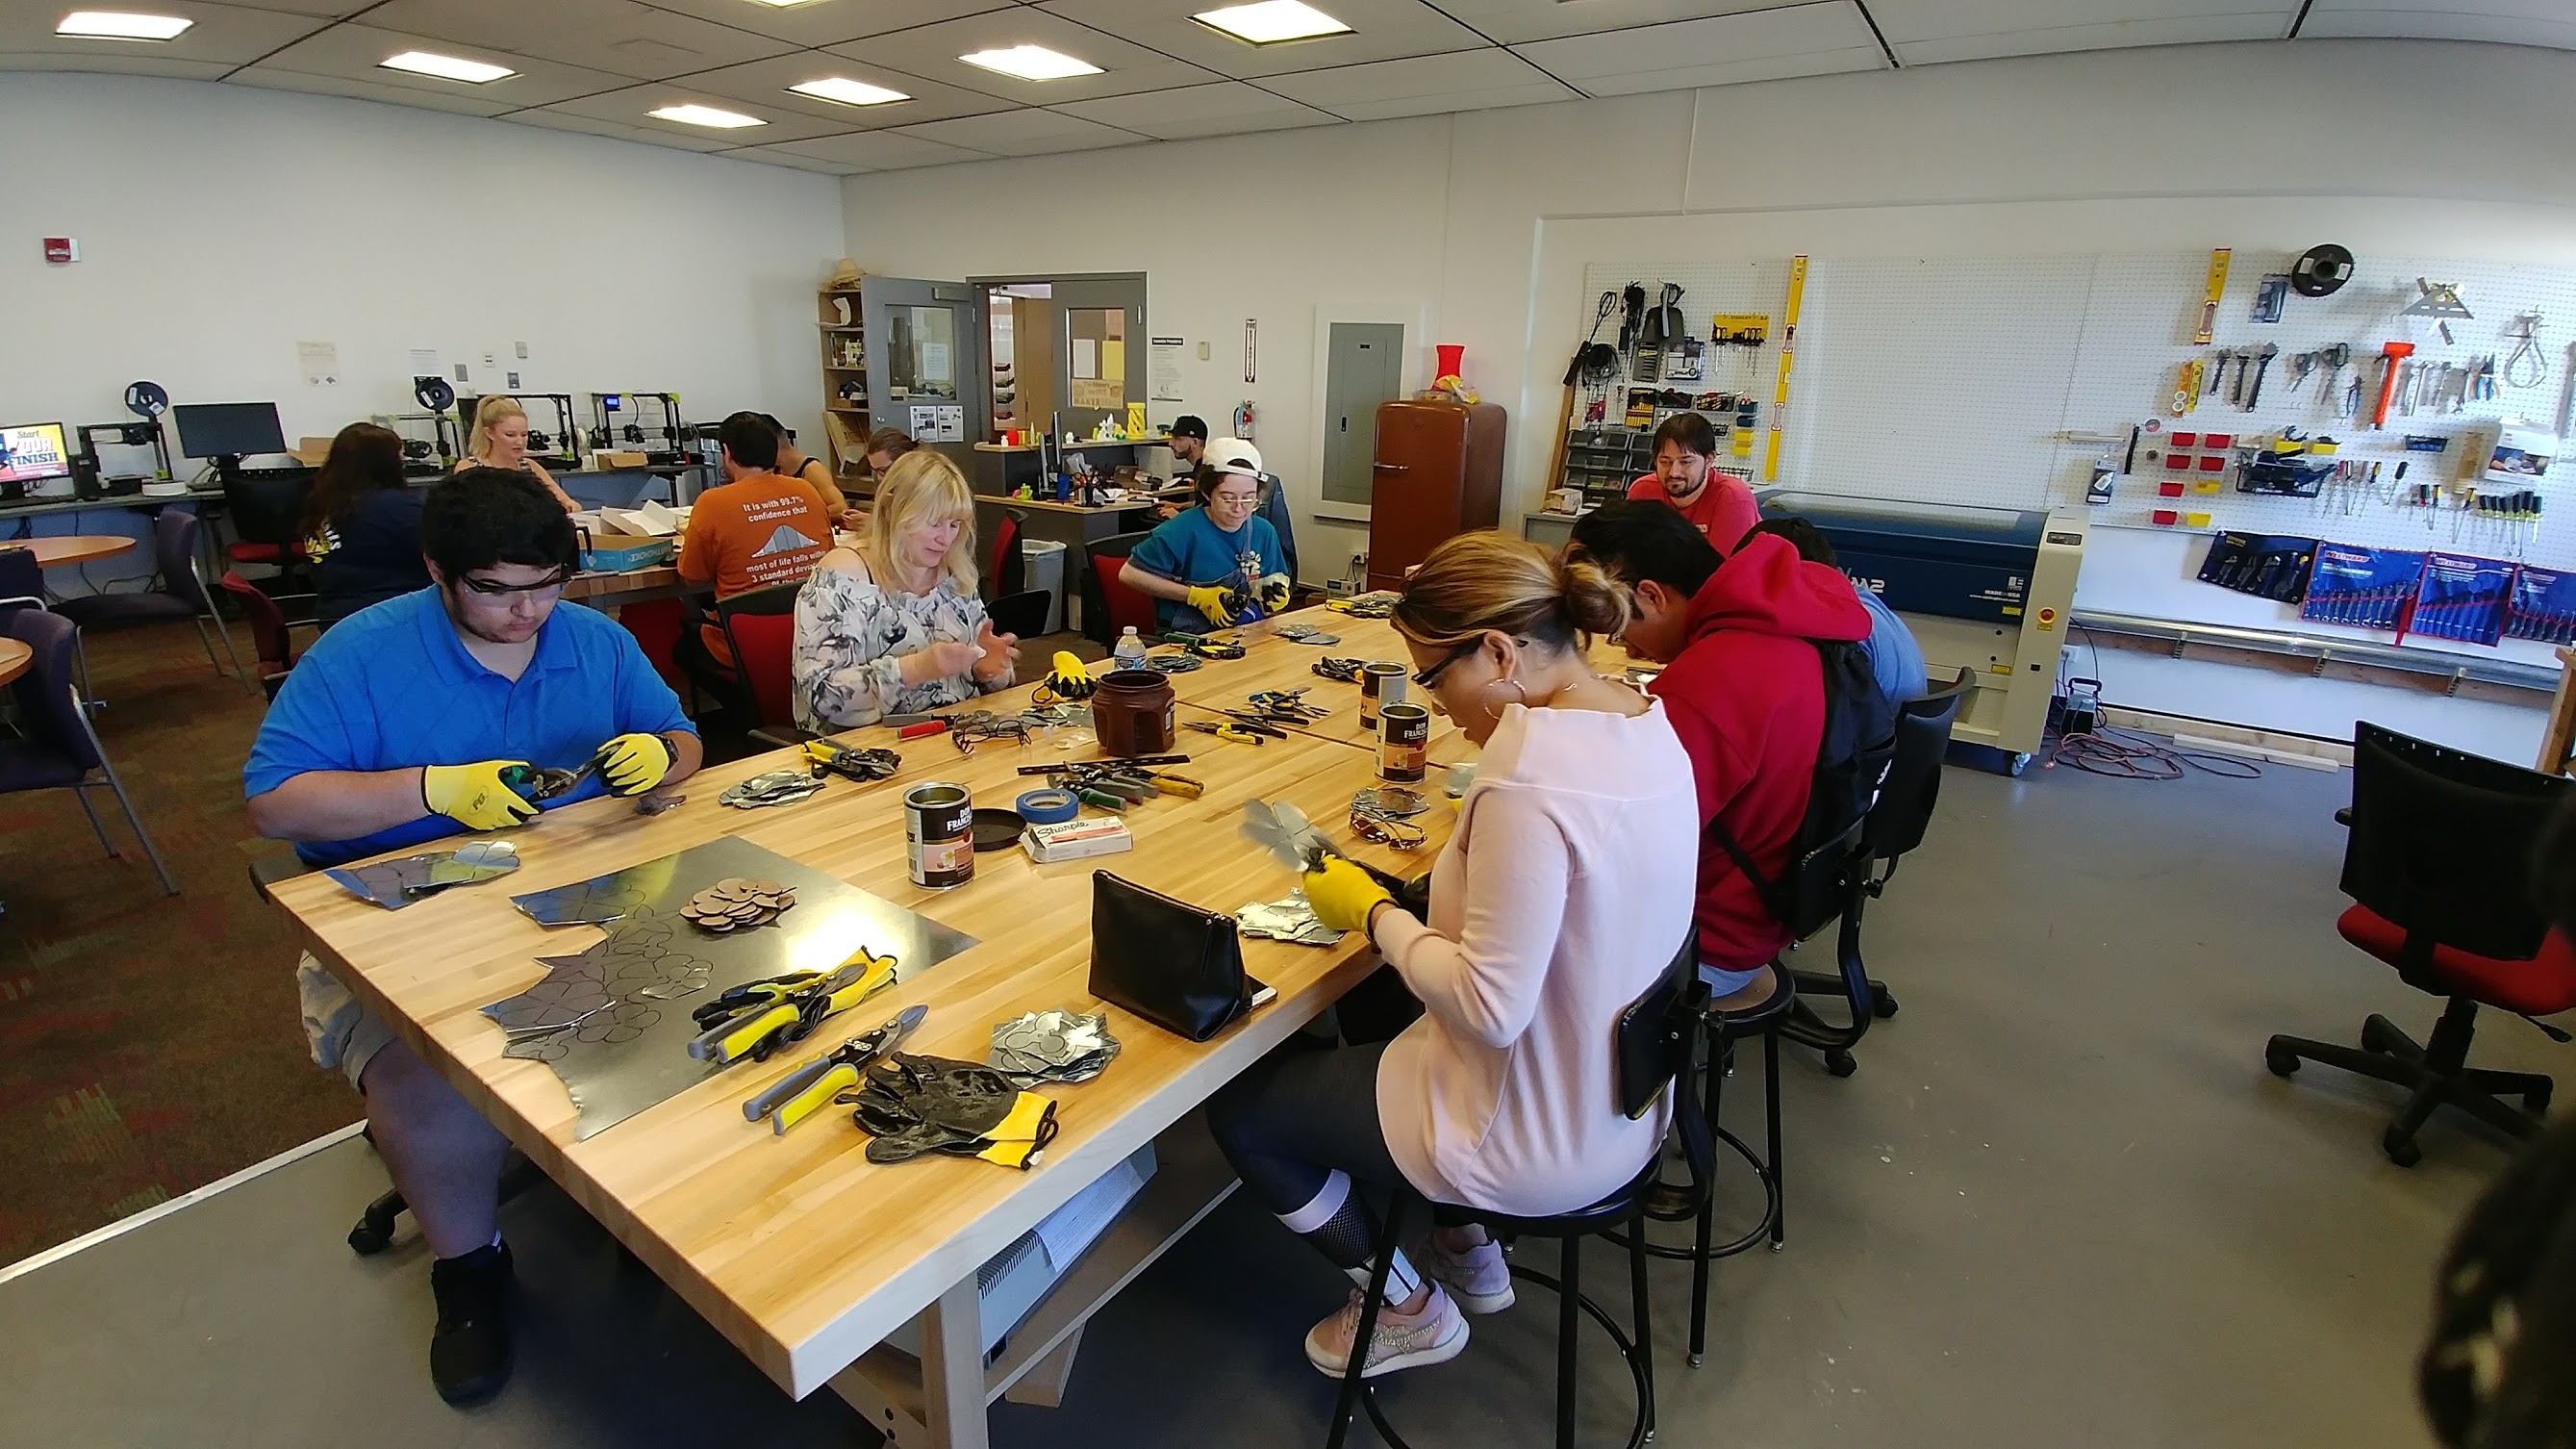 The inter-disciplinary College of the Canyons MakerSpace engaged students with workshops and connected with industry and the community through events.